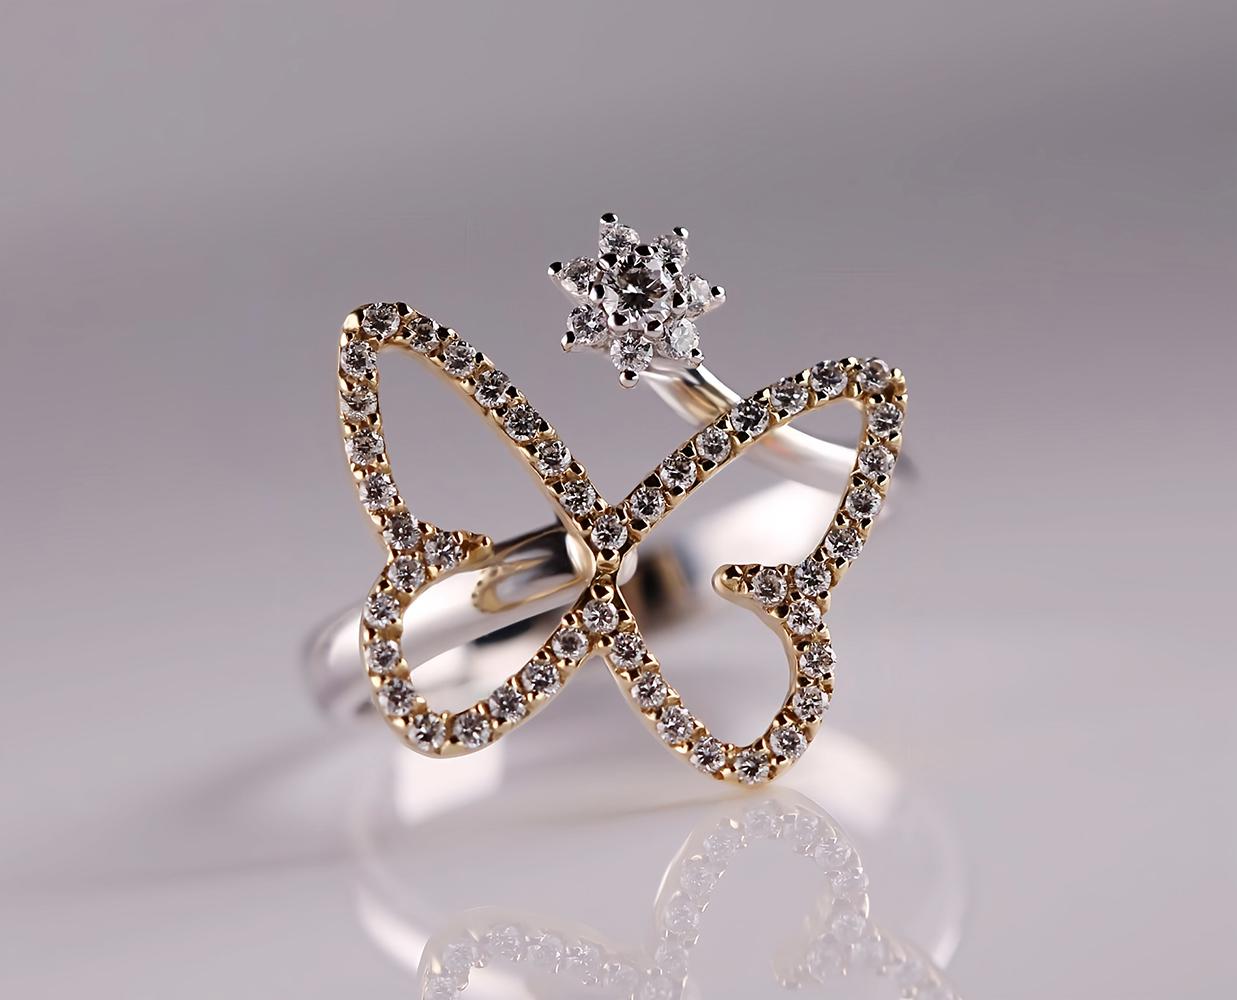 The art of jewelry finds a fresh expression in the finesse and grace of this ring. The luminous pairing of 18kt white and yellow gold outlines the contours of a butterfly and a flower, both embellished with a sparkling frame of Diamonds.

The